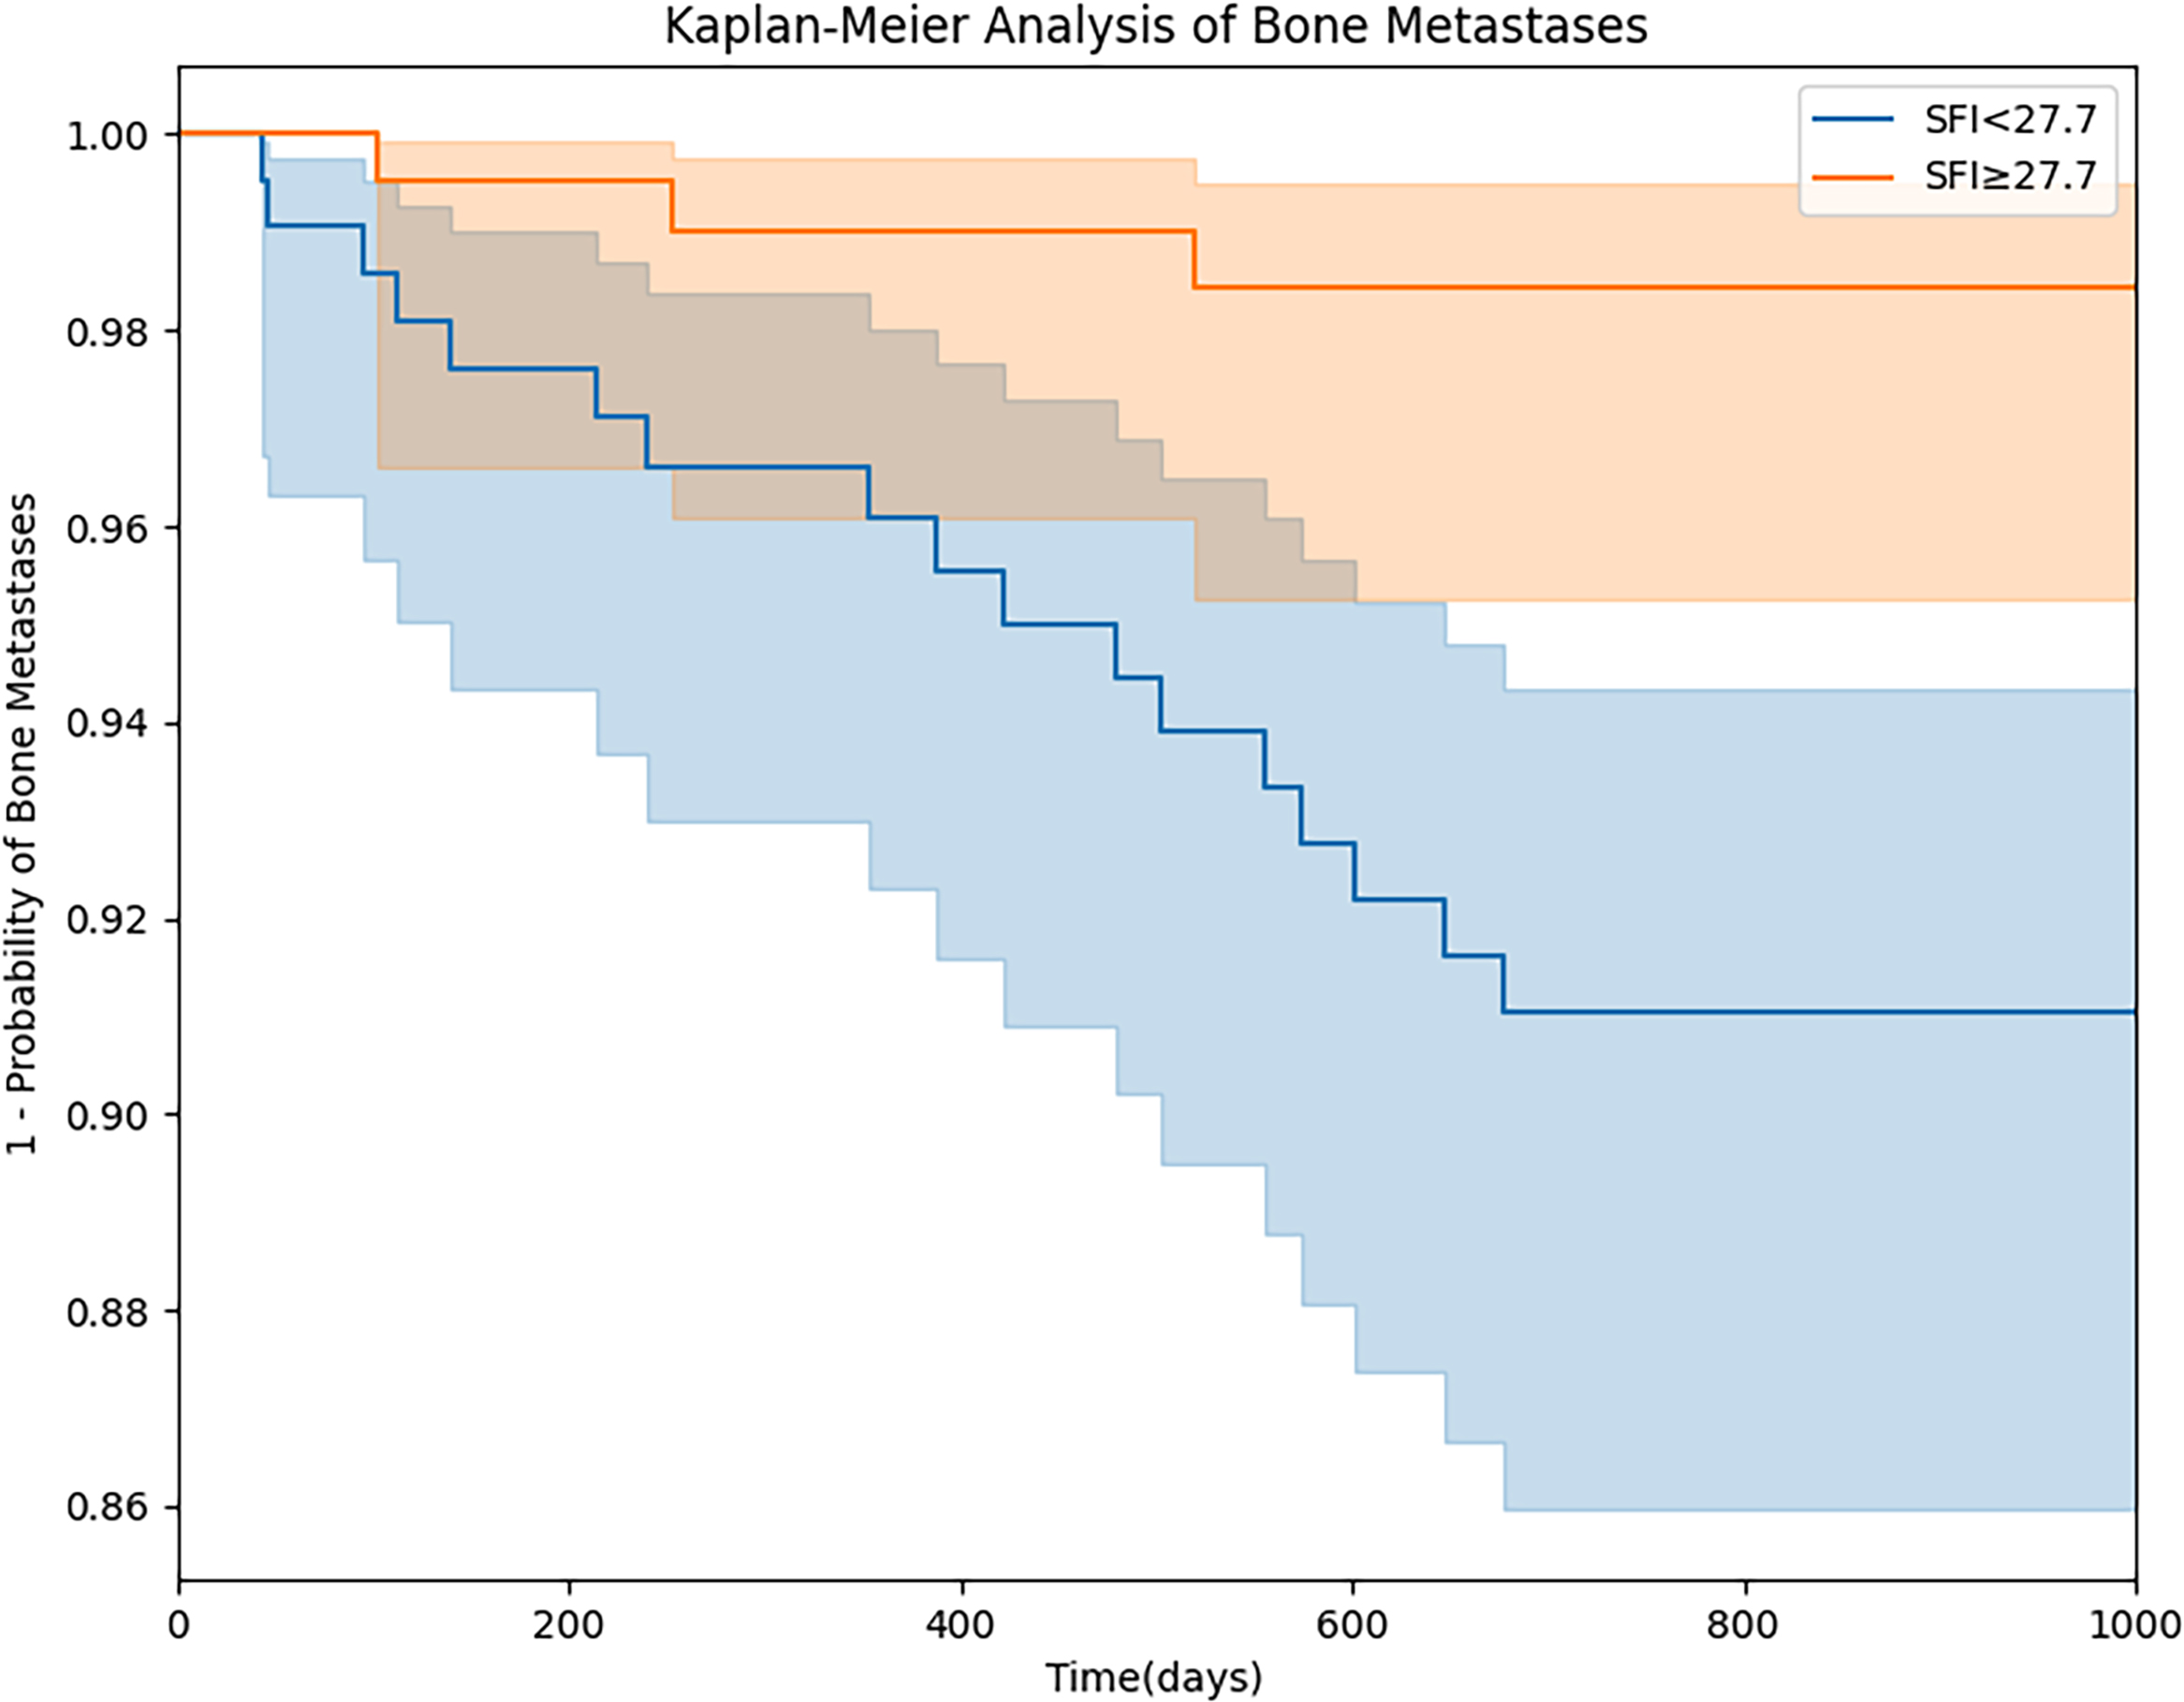 Kaplan-Meier analysis of bone metastases stratified by SFI. Patients were grouped with an SFI of 27.7 as the cutoff value. The difference in the probability of bone metastasis between the two groups was compared.